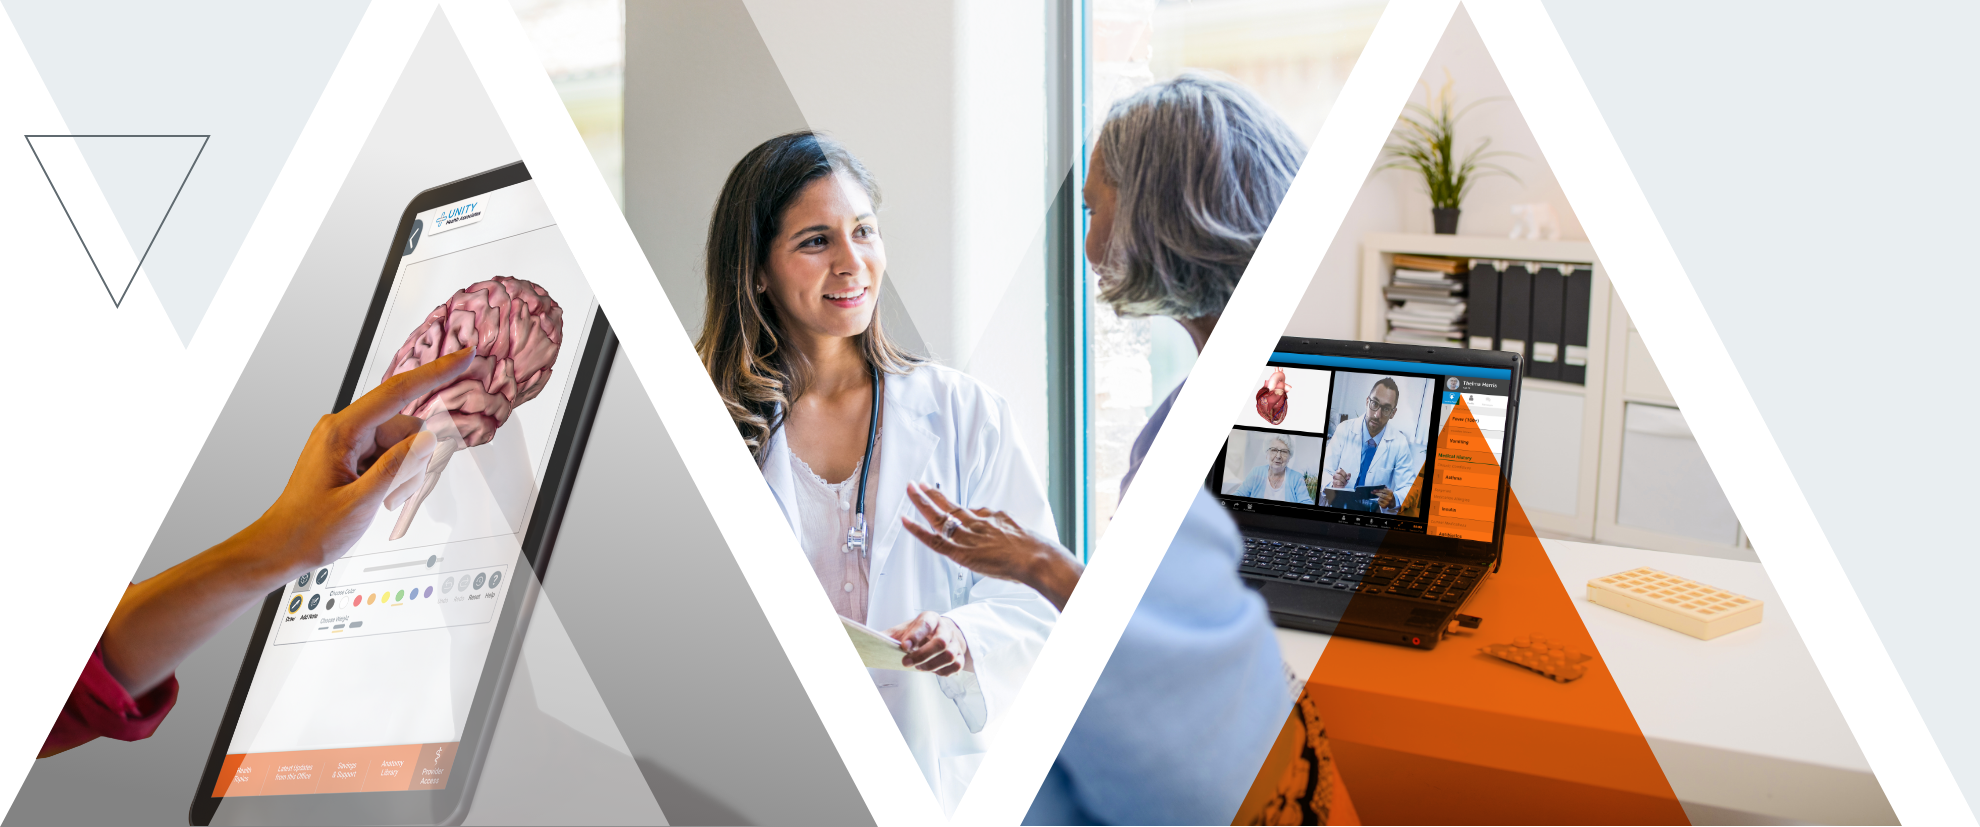 Triangle graphics showing PatientPoint's exam room touchscreen, a doctor and patient talking, and a doctor and a patient talking via telehealth appointment.